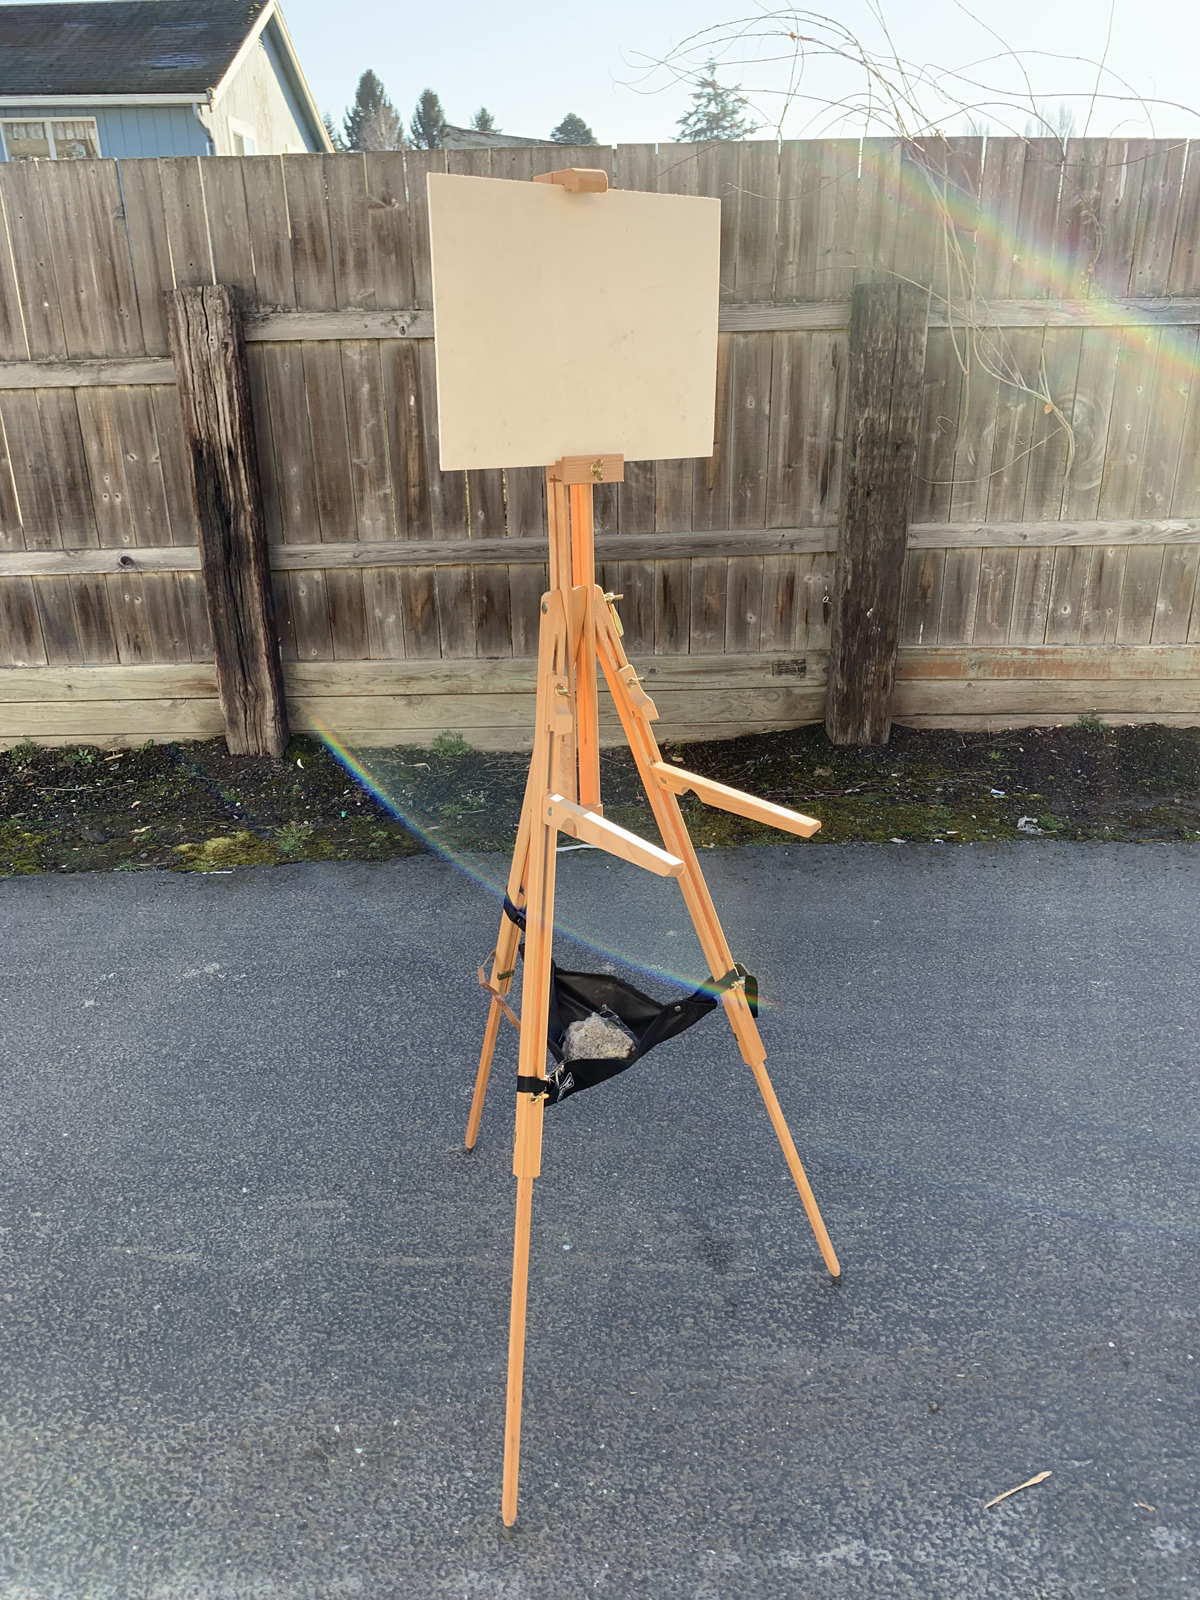 MABEF Full French Easel - Wet Paint Artists' Materials and Framing